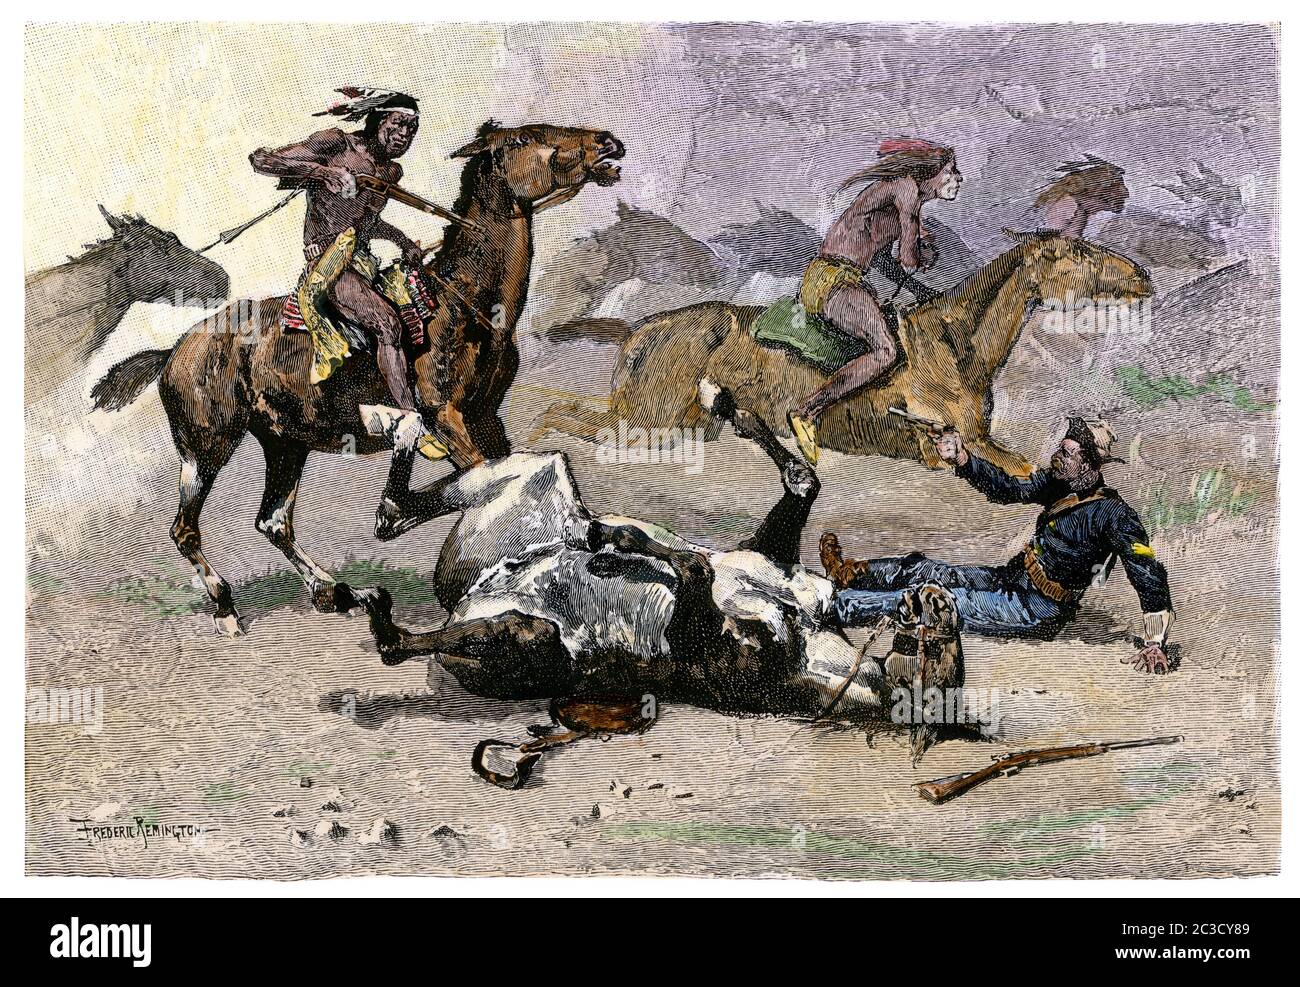 US Cavalryman unhorsed, battle of Little Bighorn, 1876. Hand-colored woodcut of a Frederic Remington illustration Stock Photo